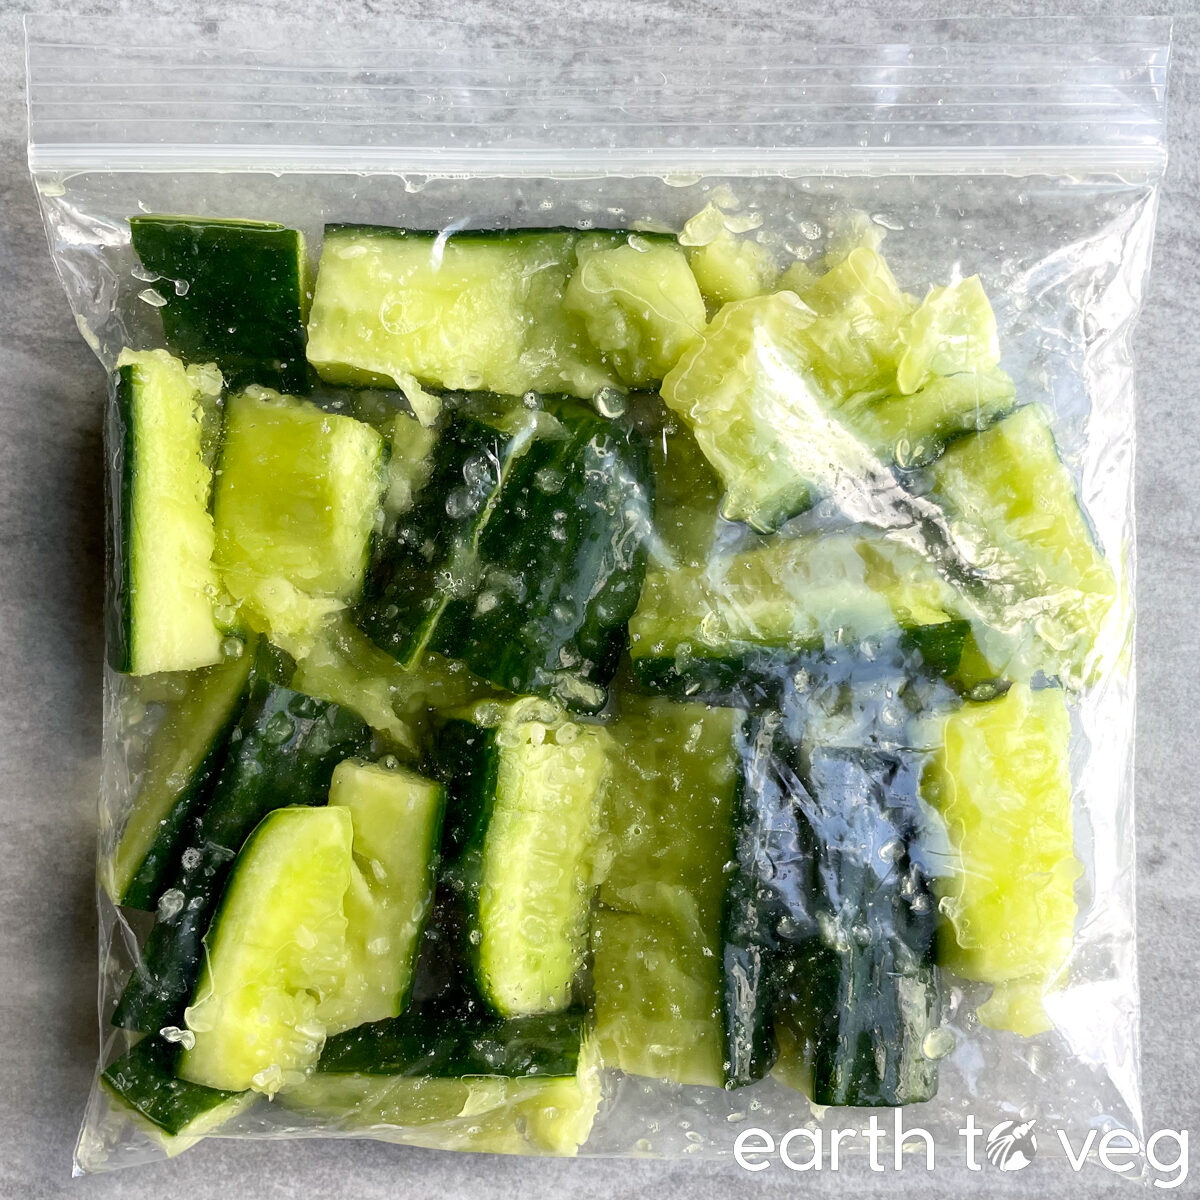 Smashed cucumbers in a small ziploc bag on a grey counter.